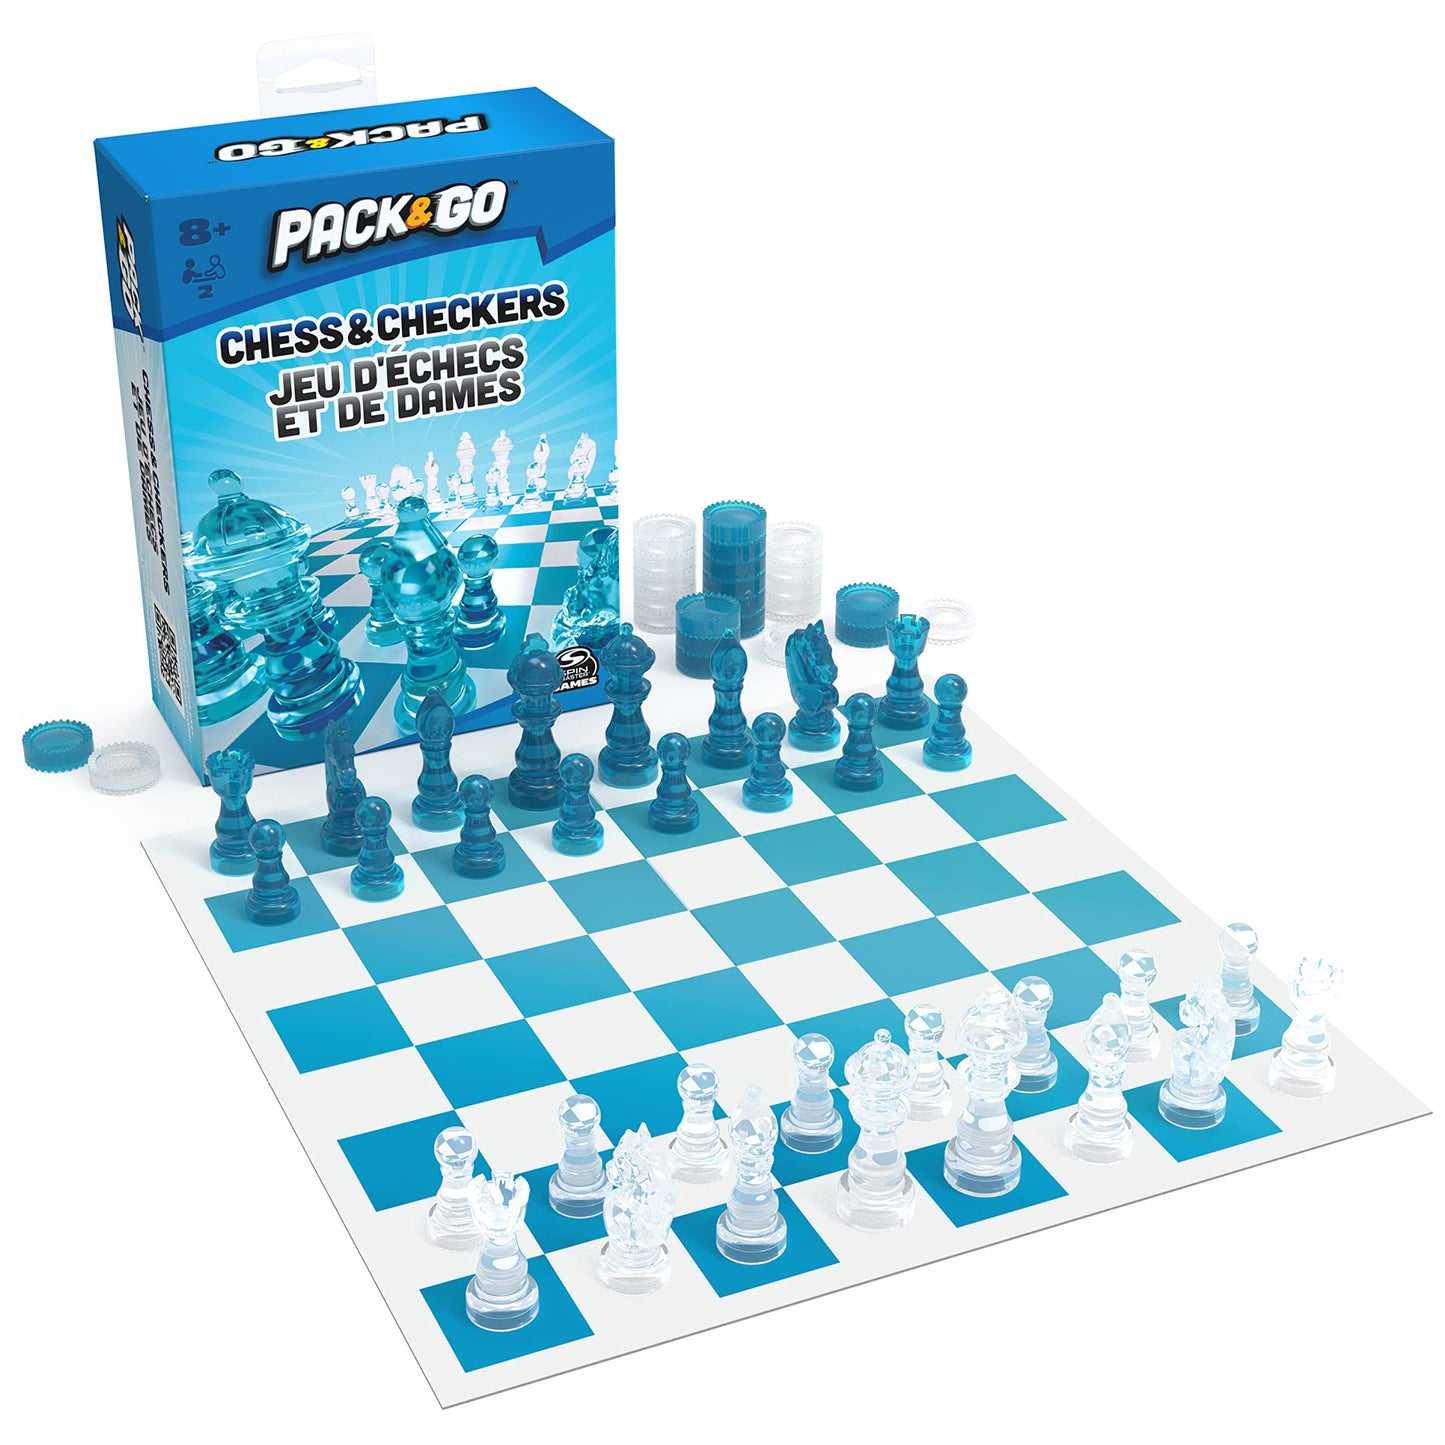 Pack & Go Chess & Checkers Board Game from Spin Master Games Portable 2-Player Games Chess Board Chess Set for Adults and Kids Ages 8 and up